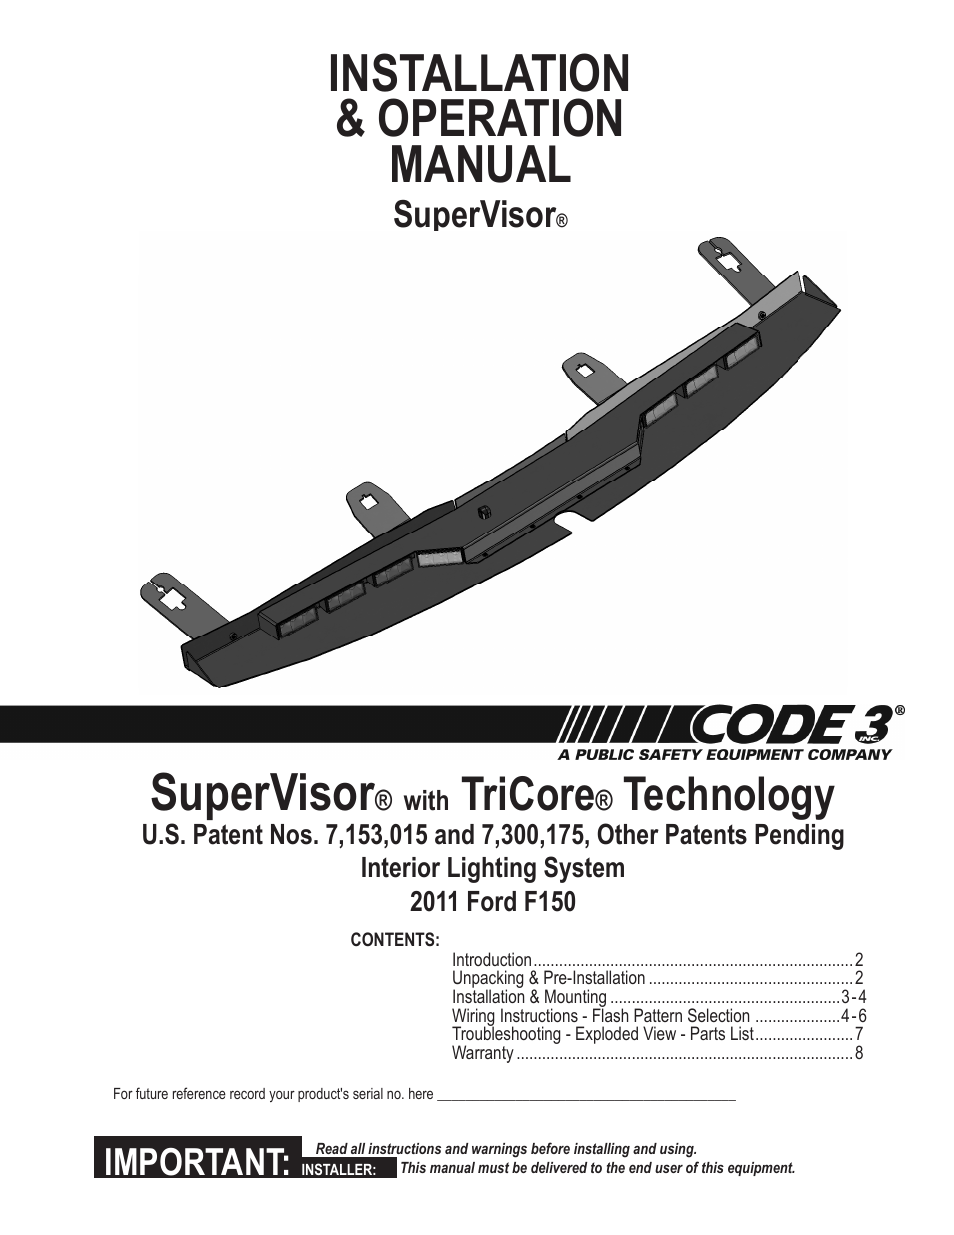 Code 3 Supervisor With Tricore For Ford F150 User Manual 8